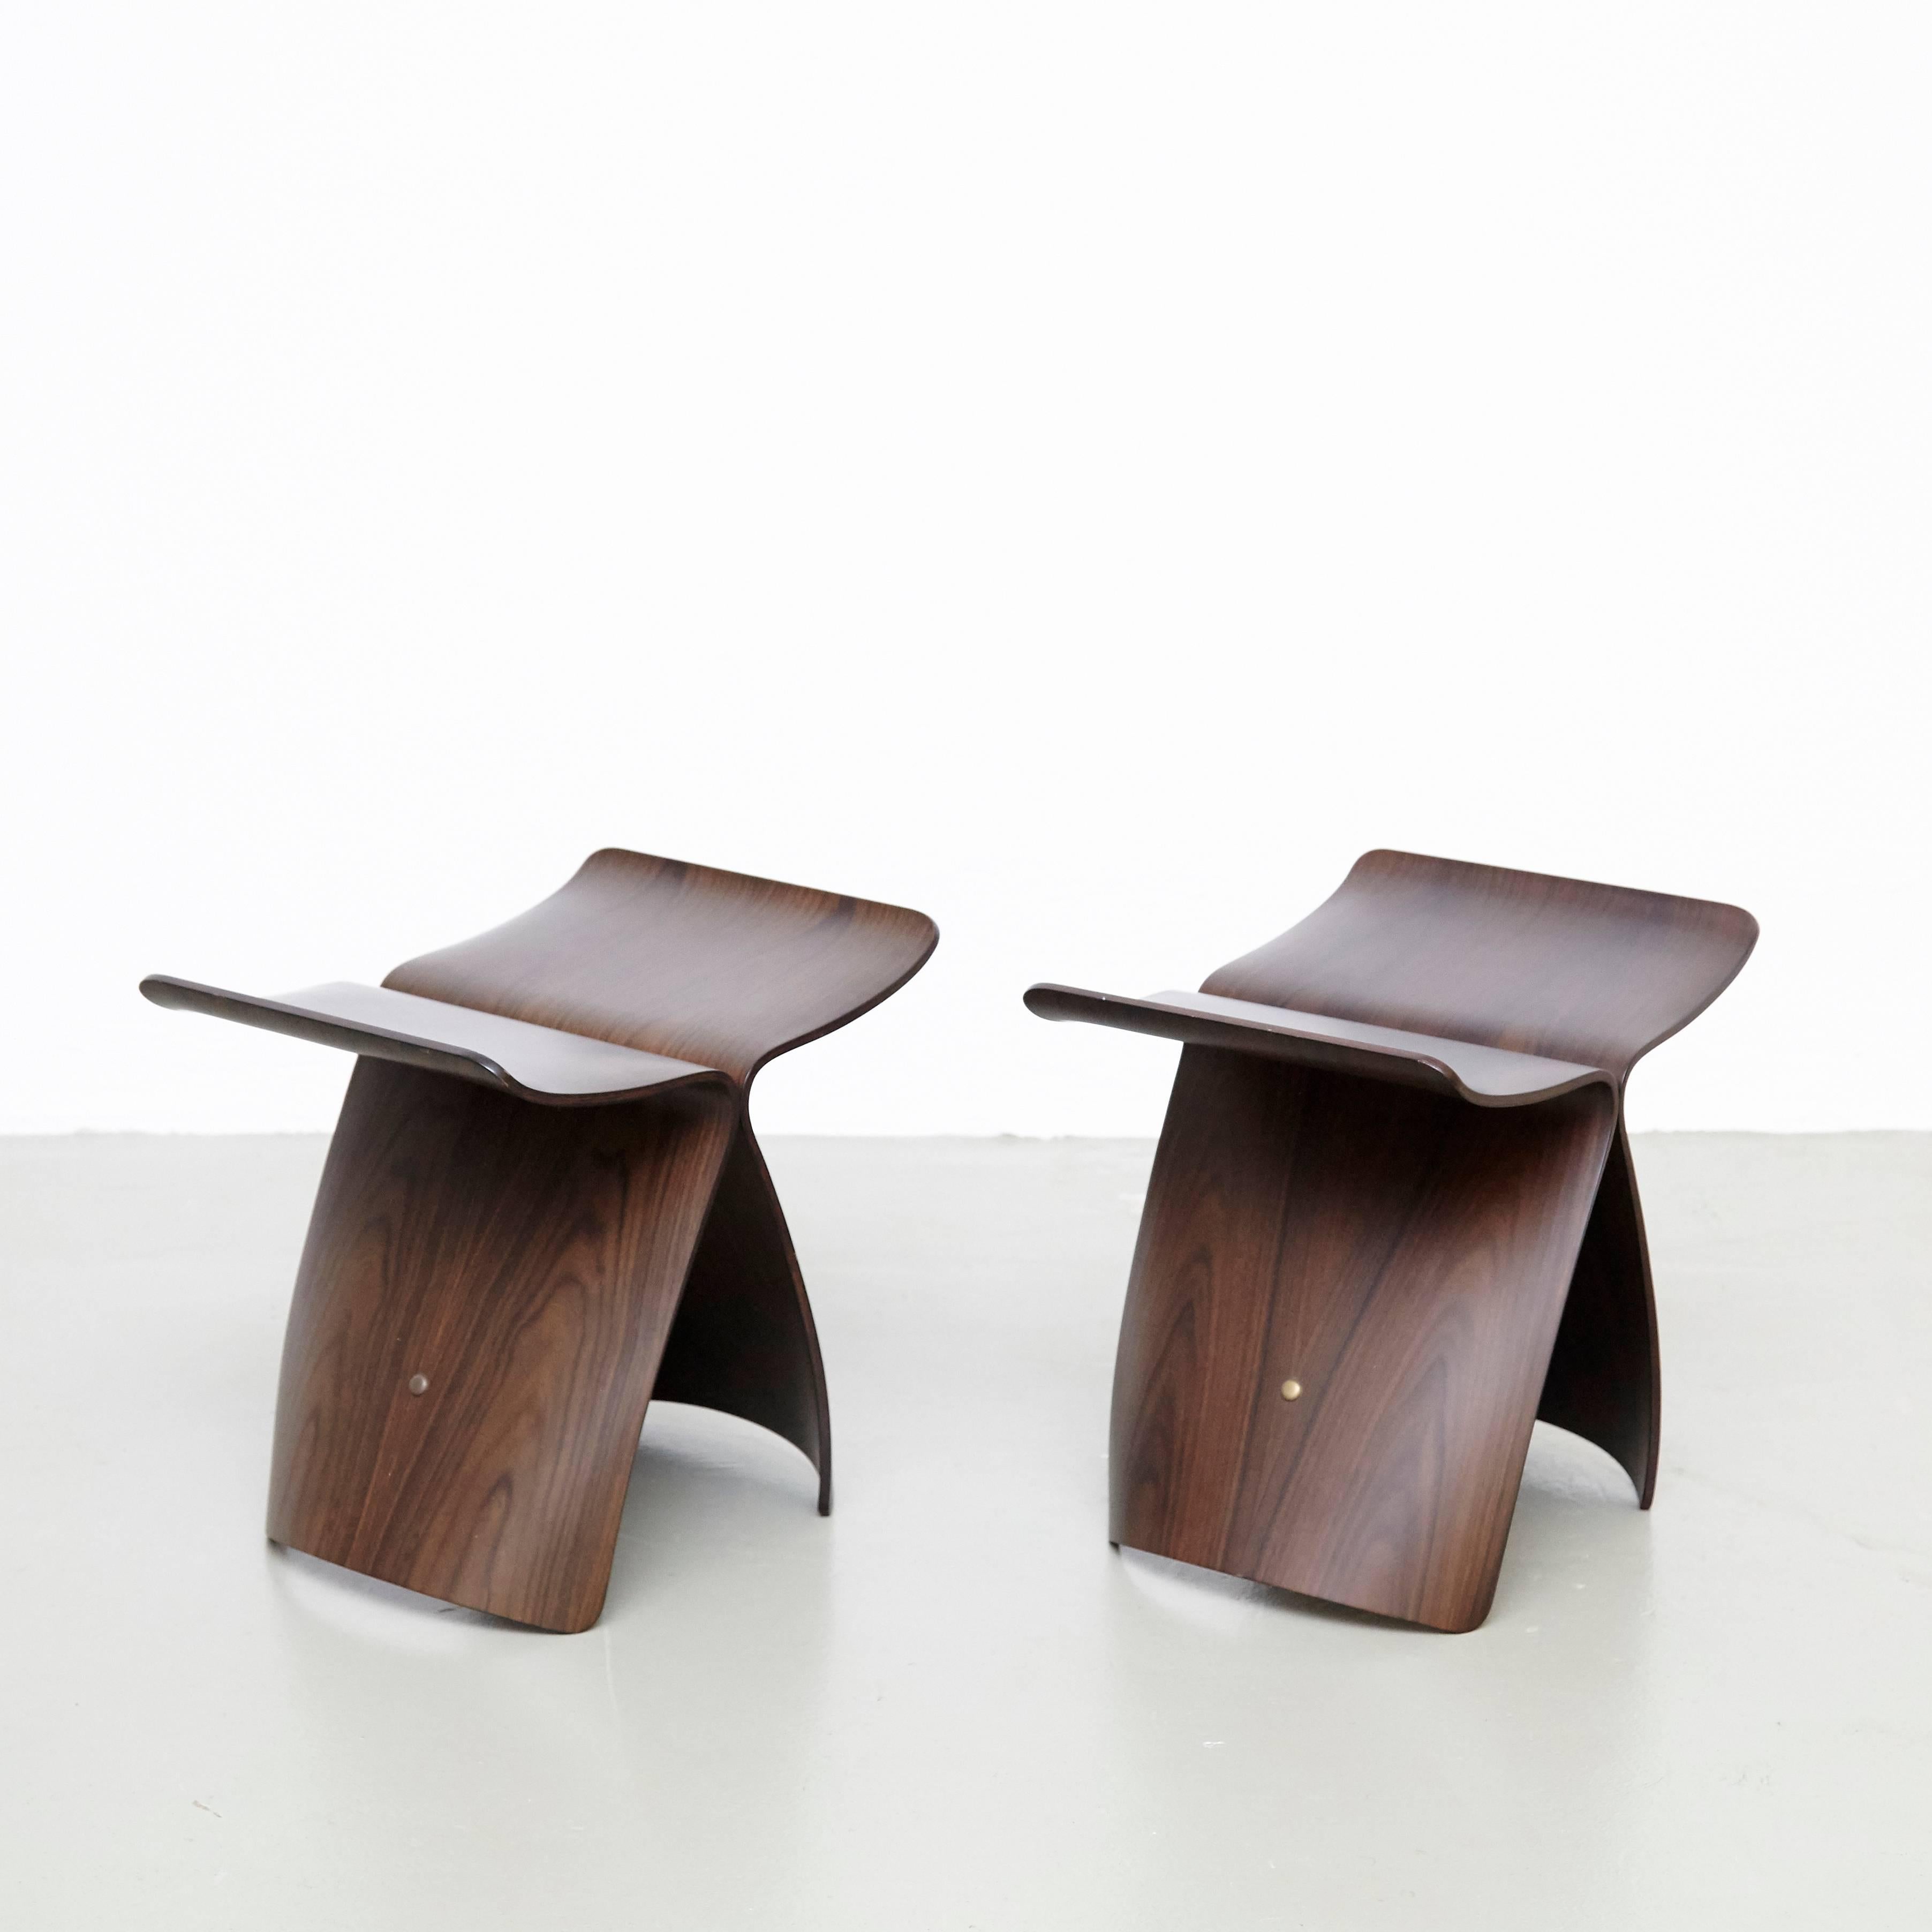 Pair of butterfly stools designed by Sori Yanagi.
Manufactured by Tendo Mokko (Japan) in 1954.

In good original condition with minor wear consistent with age and use, preserving a beautiful patina.

Sori Yanagi, born in 1915 in Tokyo, attended